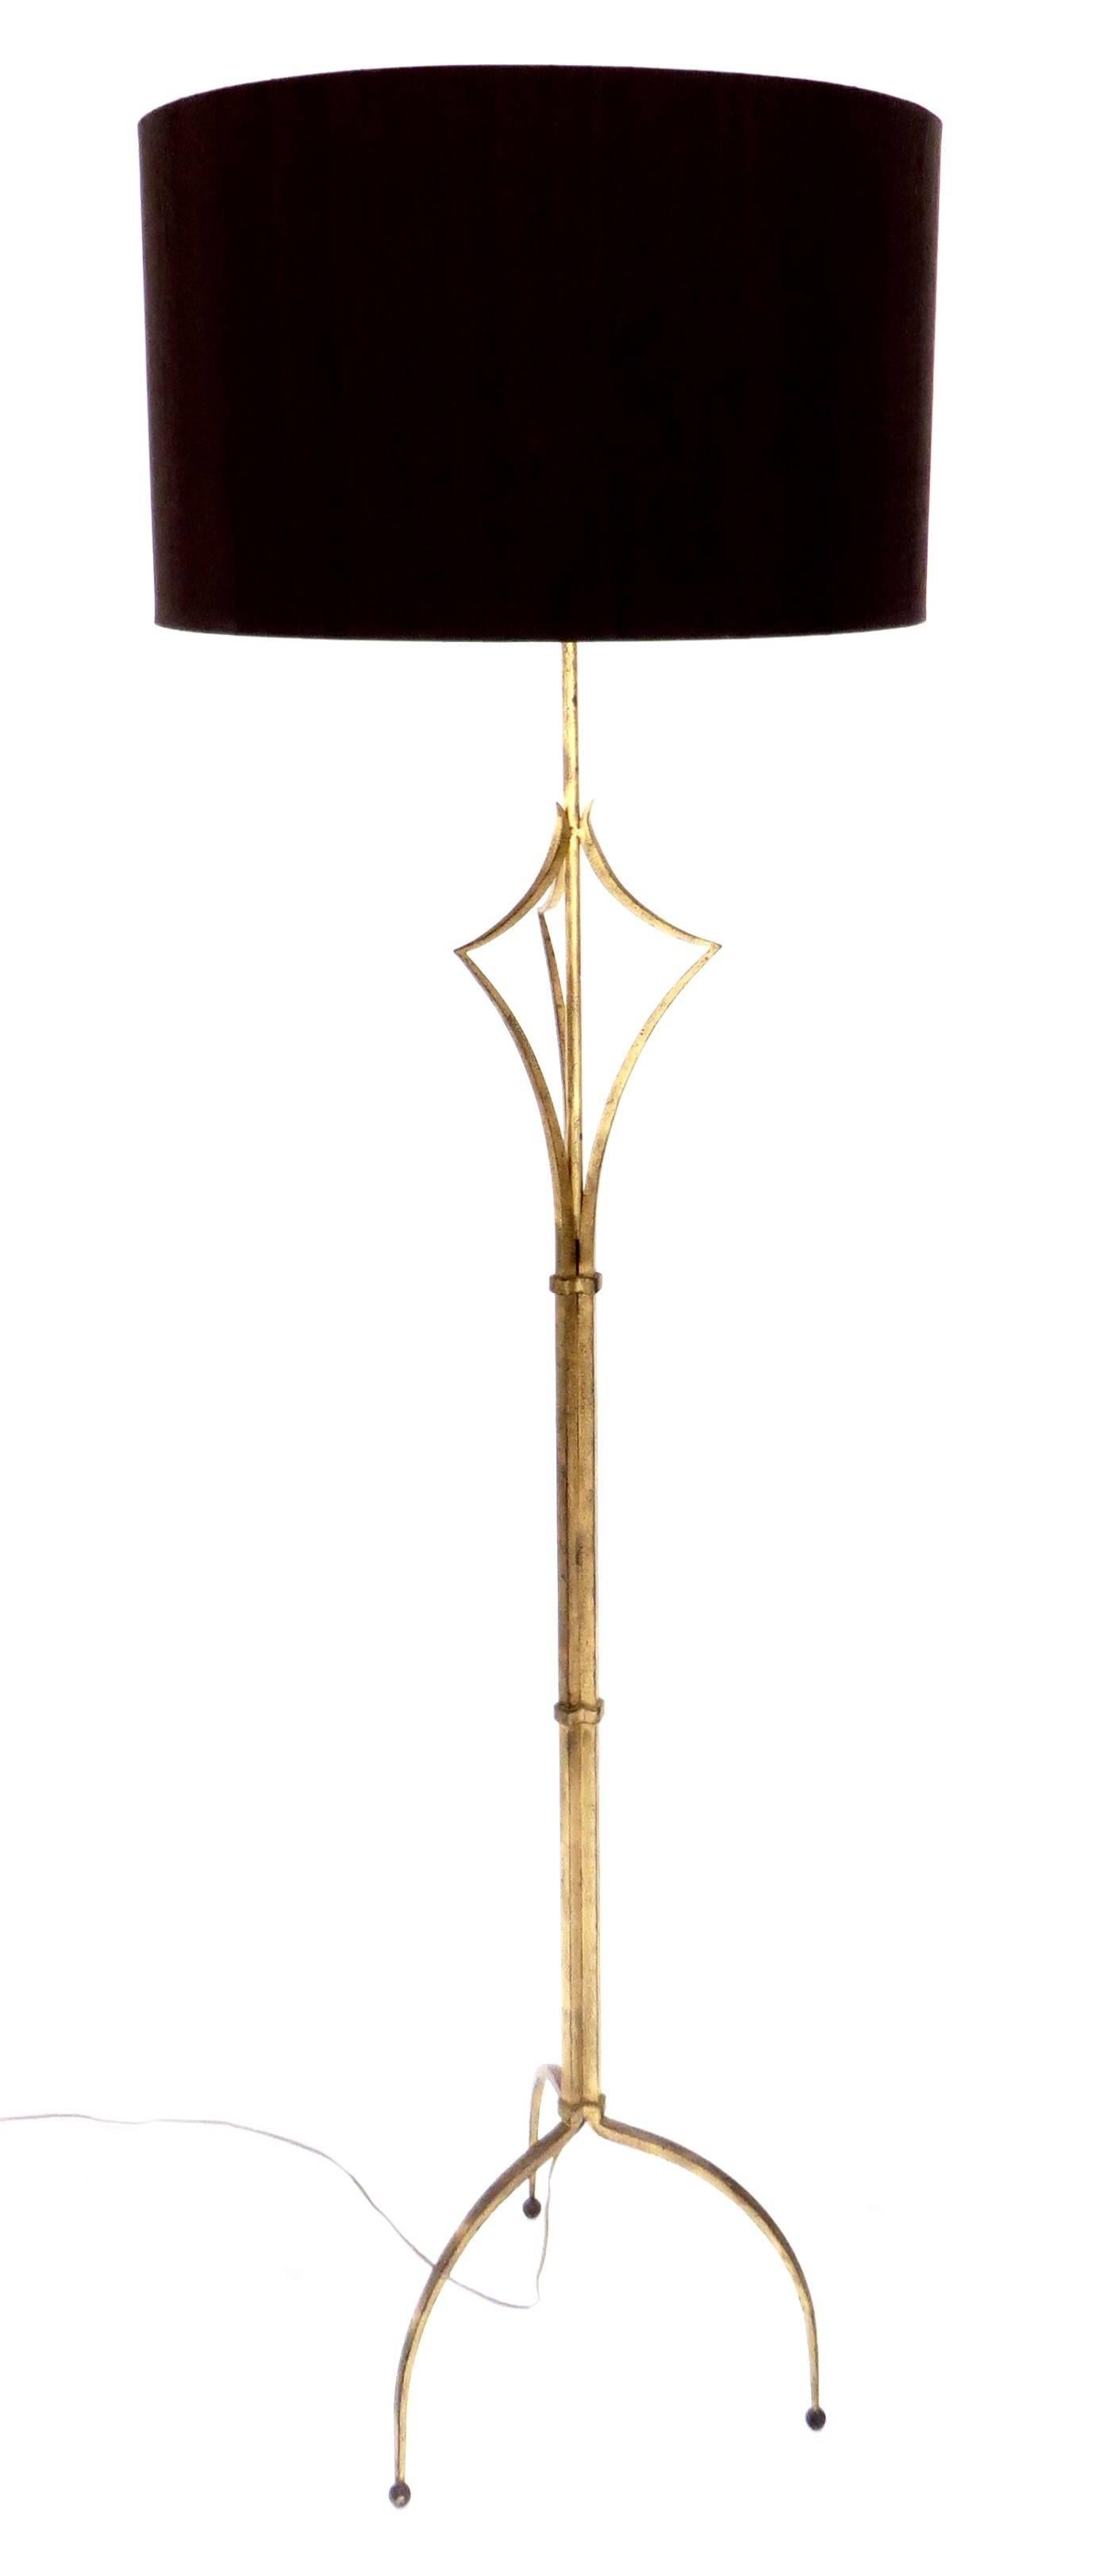 A French gilded iron floor lamp in the manner of Felix Agostini or Roger Thibier. 
Unsigned and undocumented but with wonderful delicate and exuberant details. 
Overall size: 13" x 13" x 13" x 58" to the bottom of the